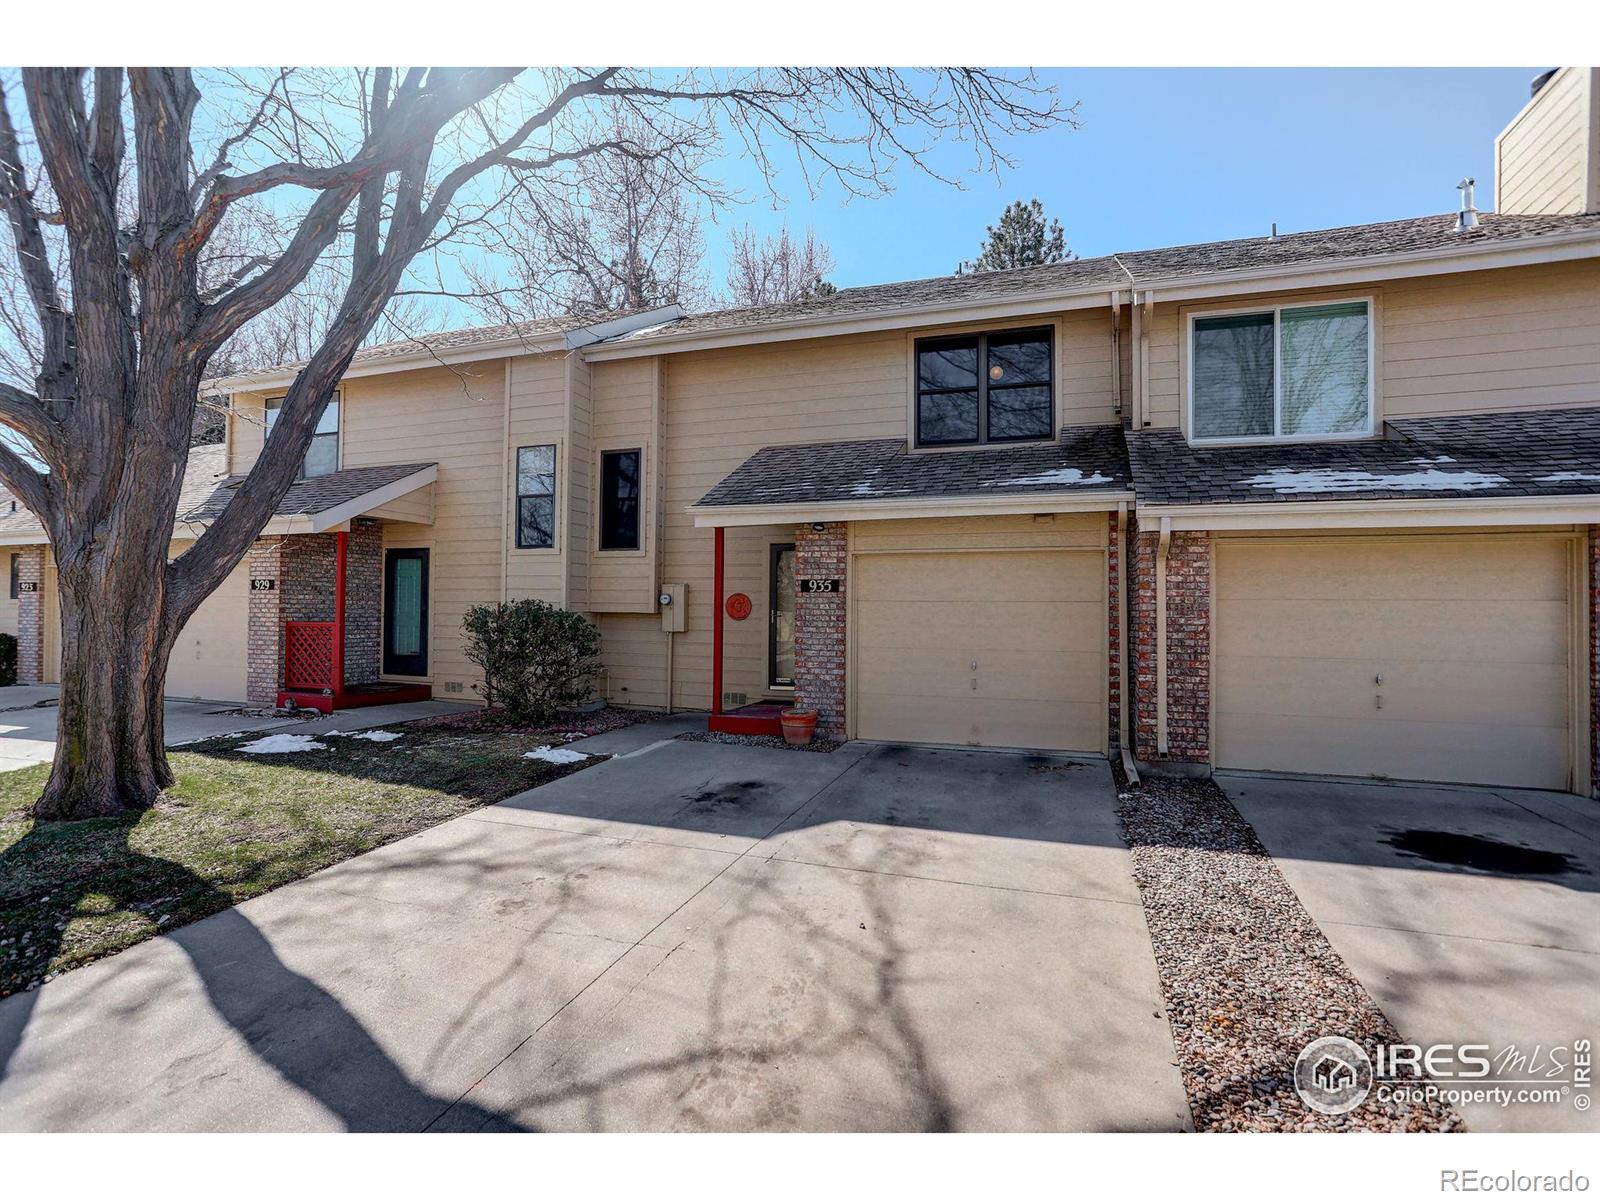 935  gilgalad way, fort collins sold home. Closed on 2024-04-18 for $407,700.